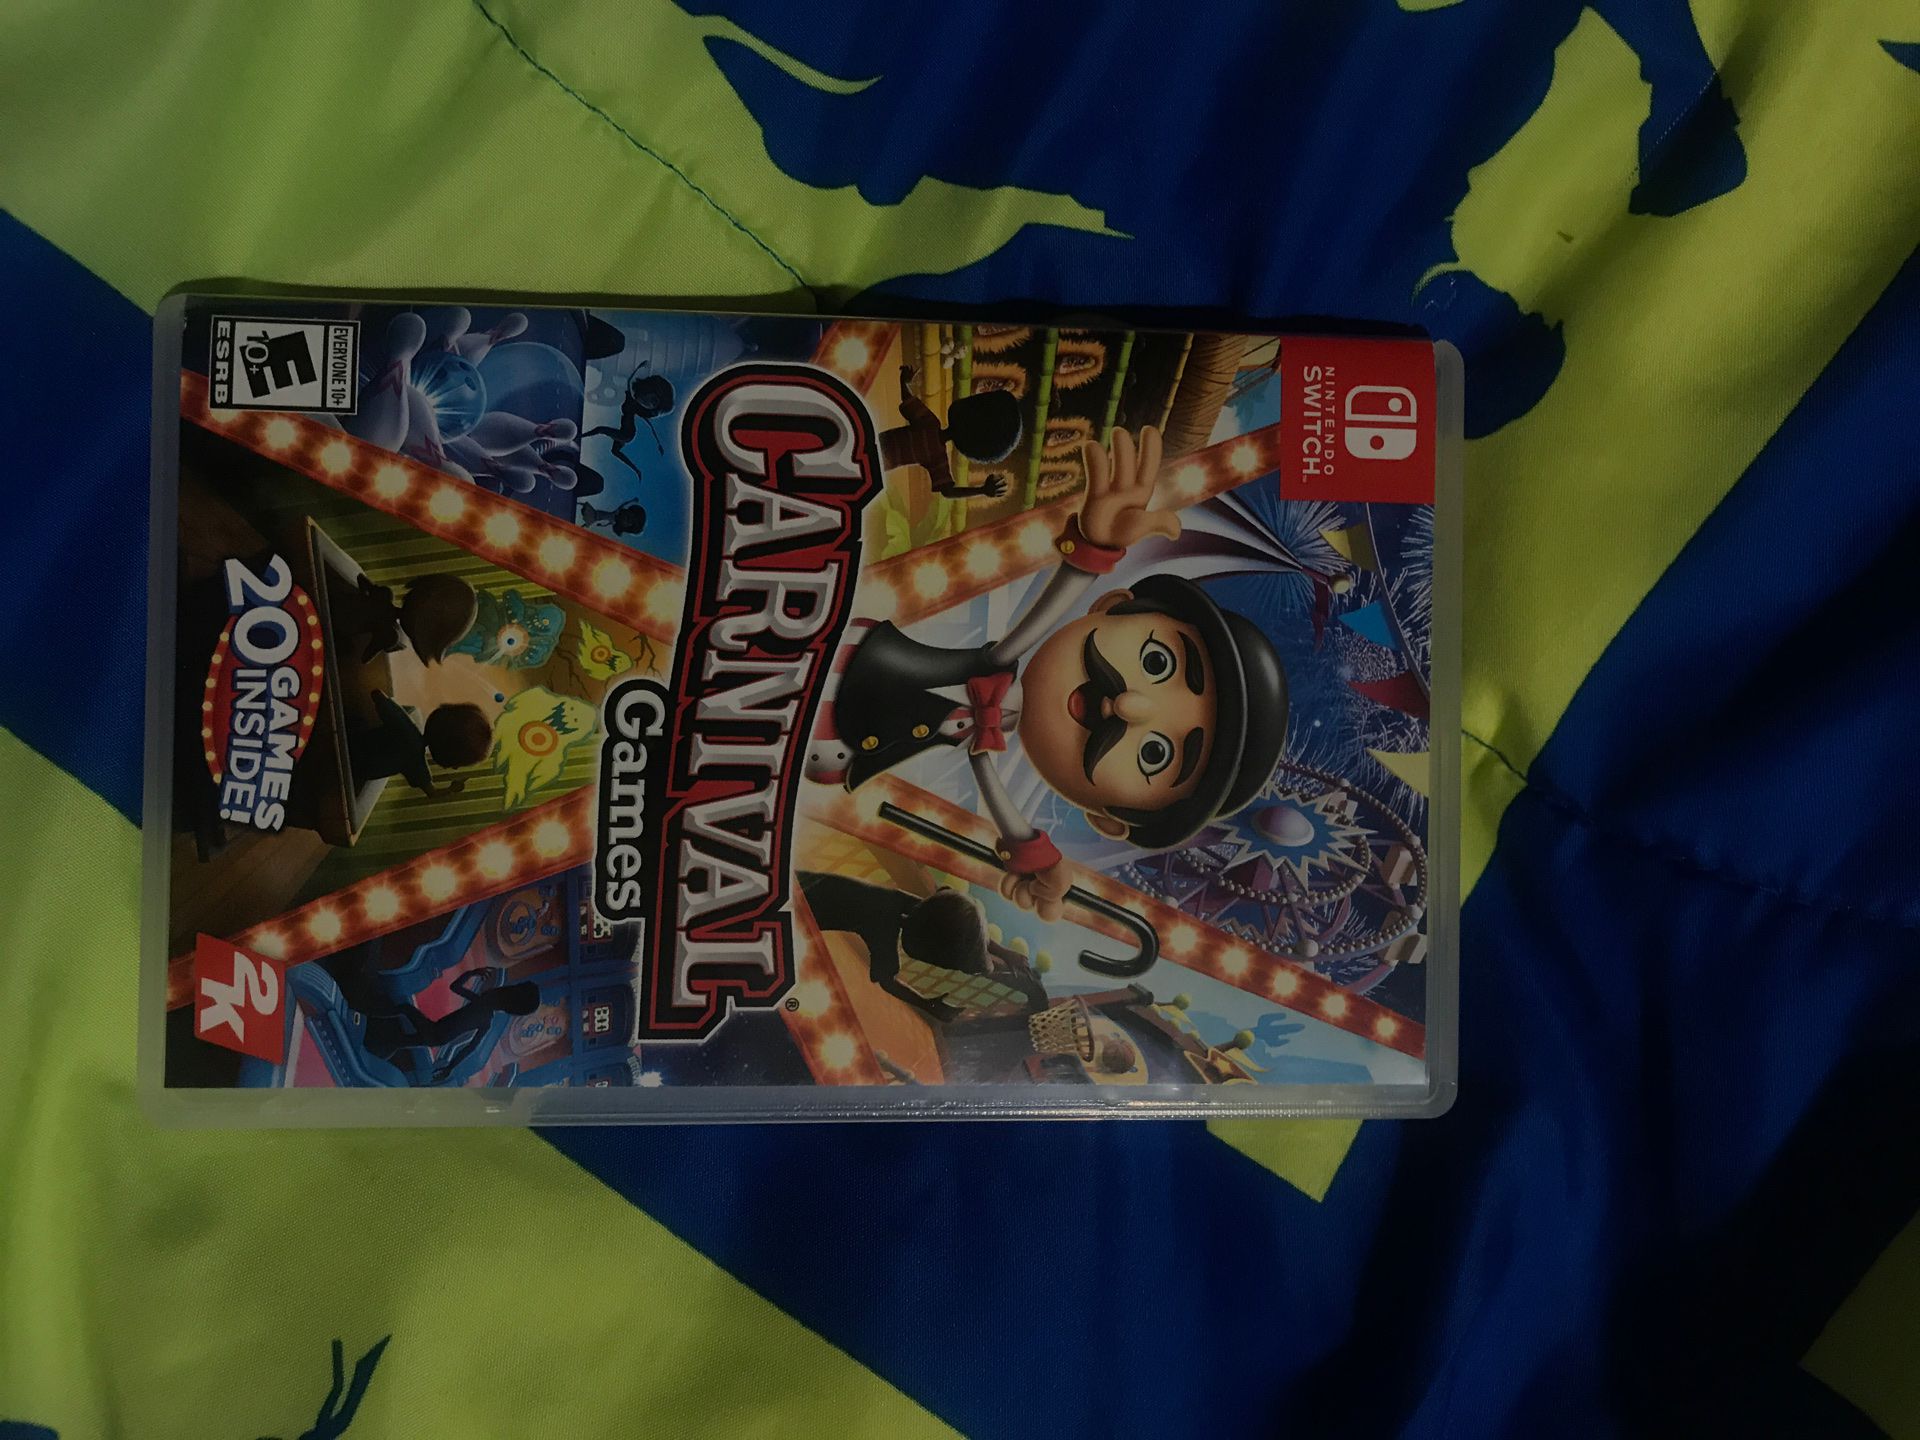 Carnival games nintendo switch “PICK UP ONLY”